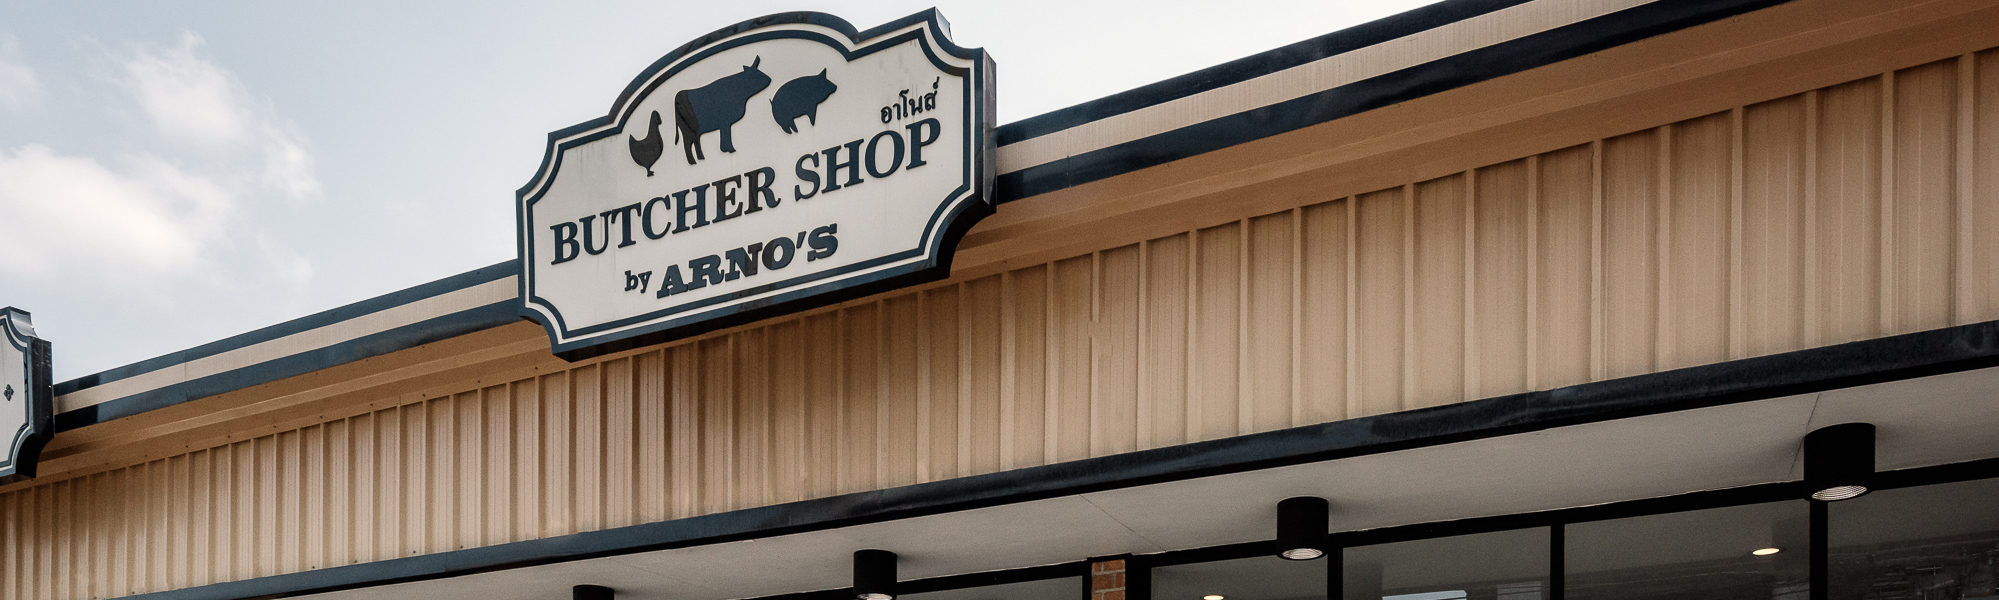 Butcher Shop by Arno's